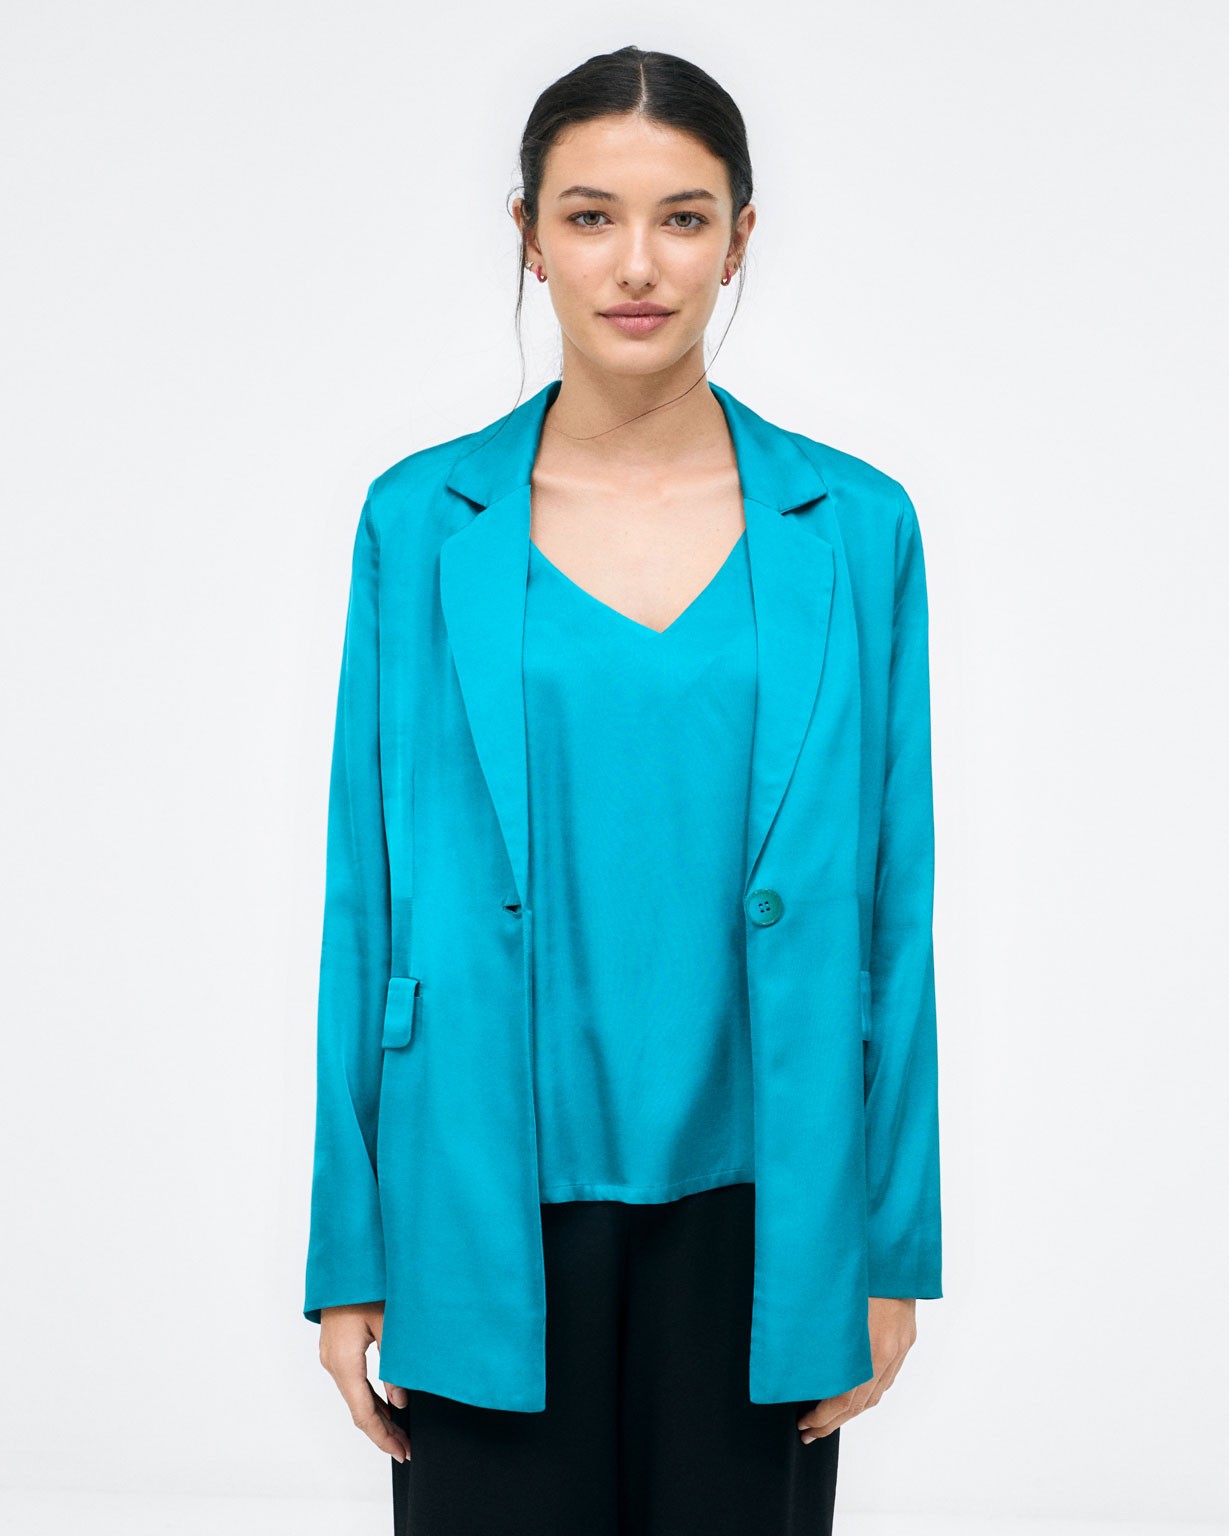 Blazer with flap pockets and belt. Plain  Turquoise